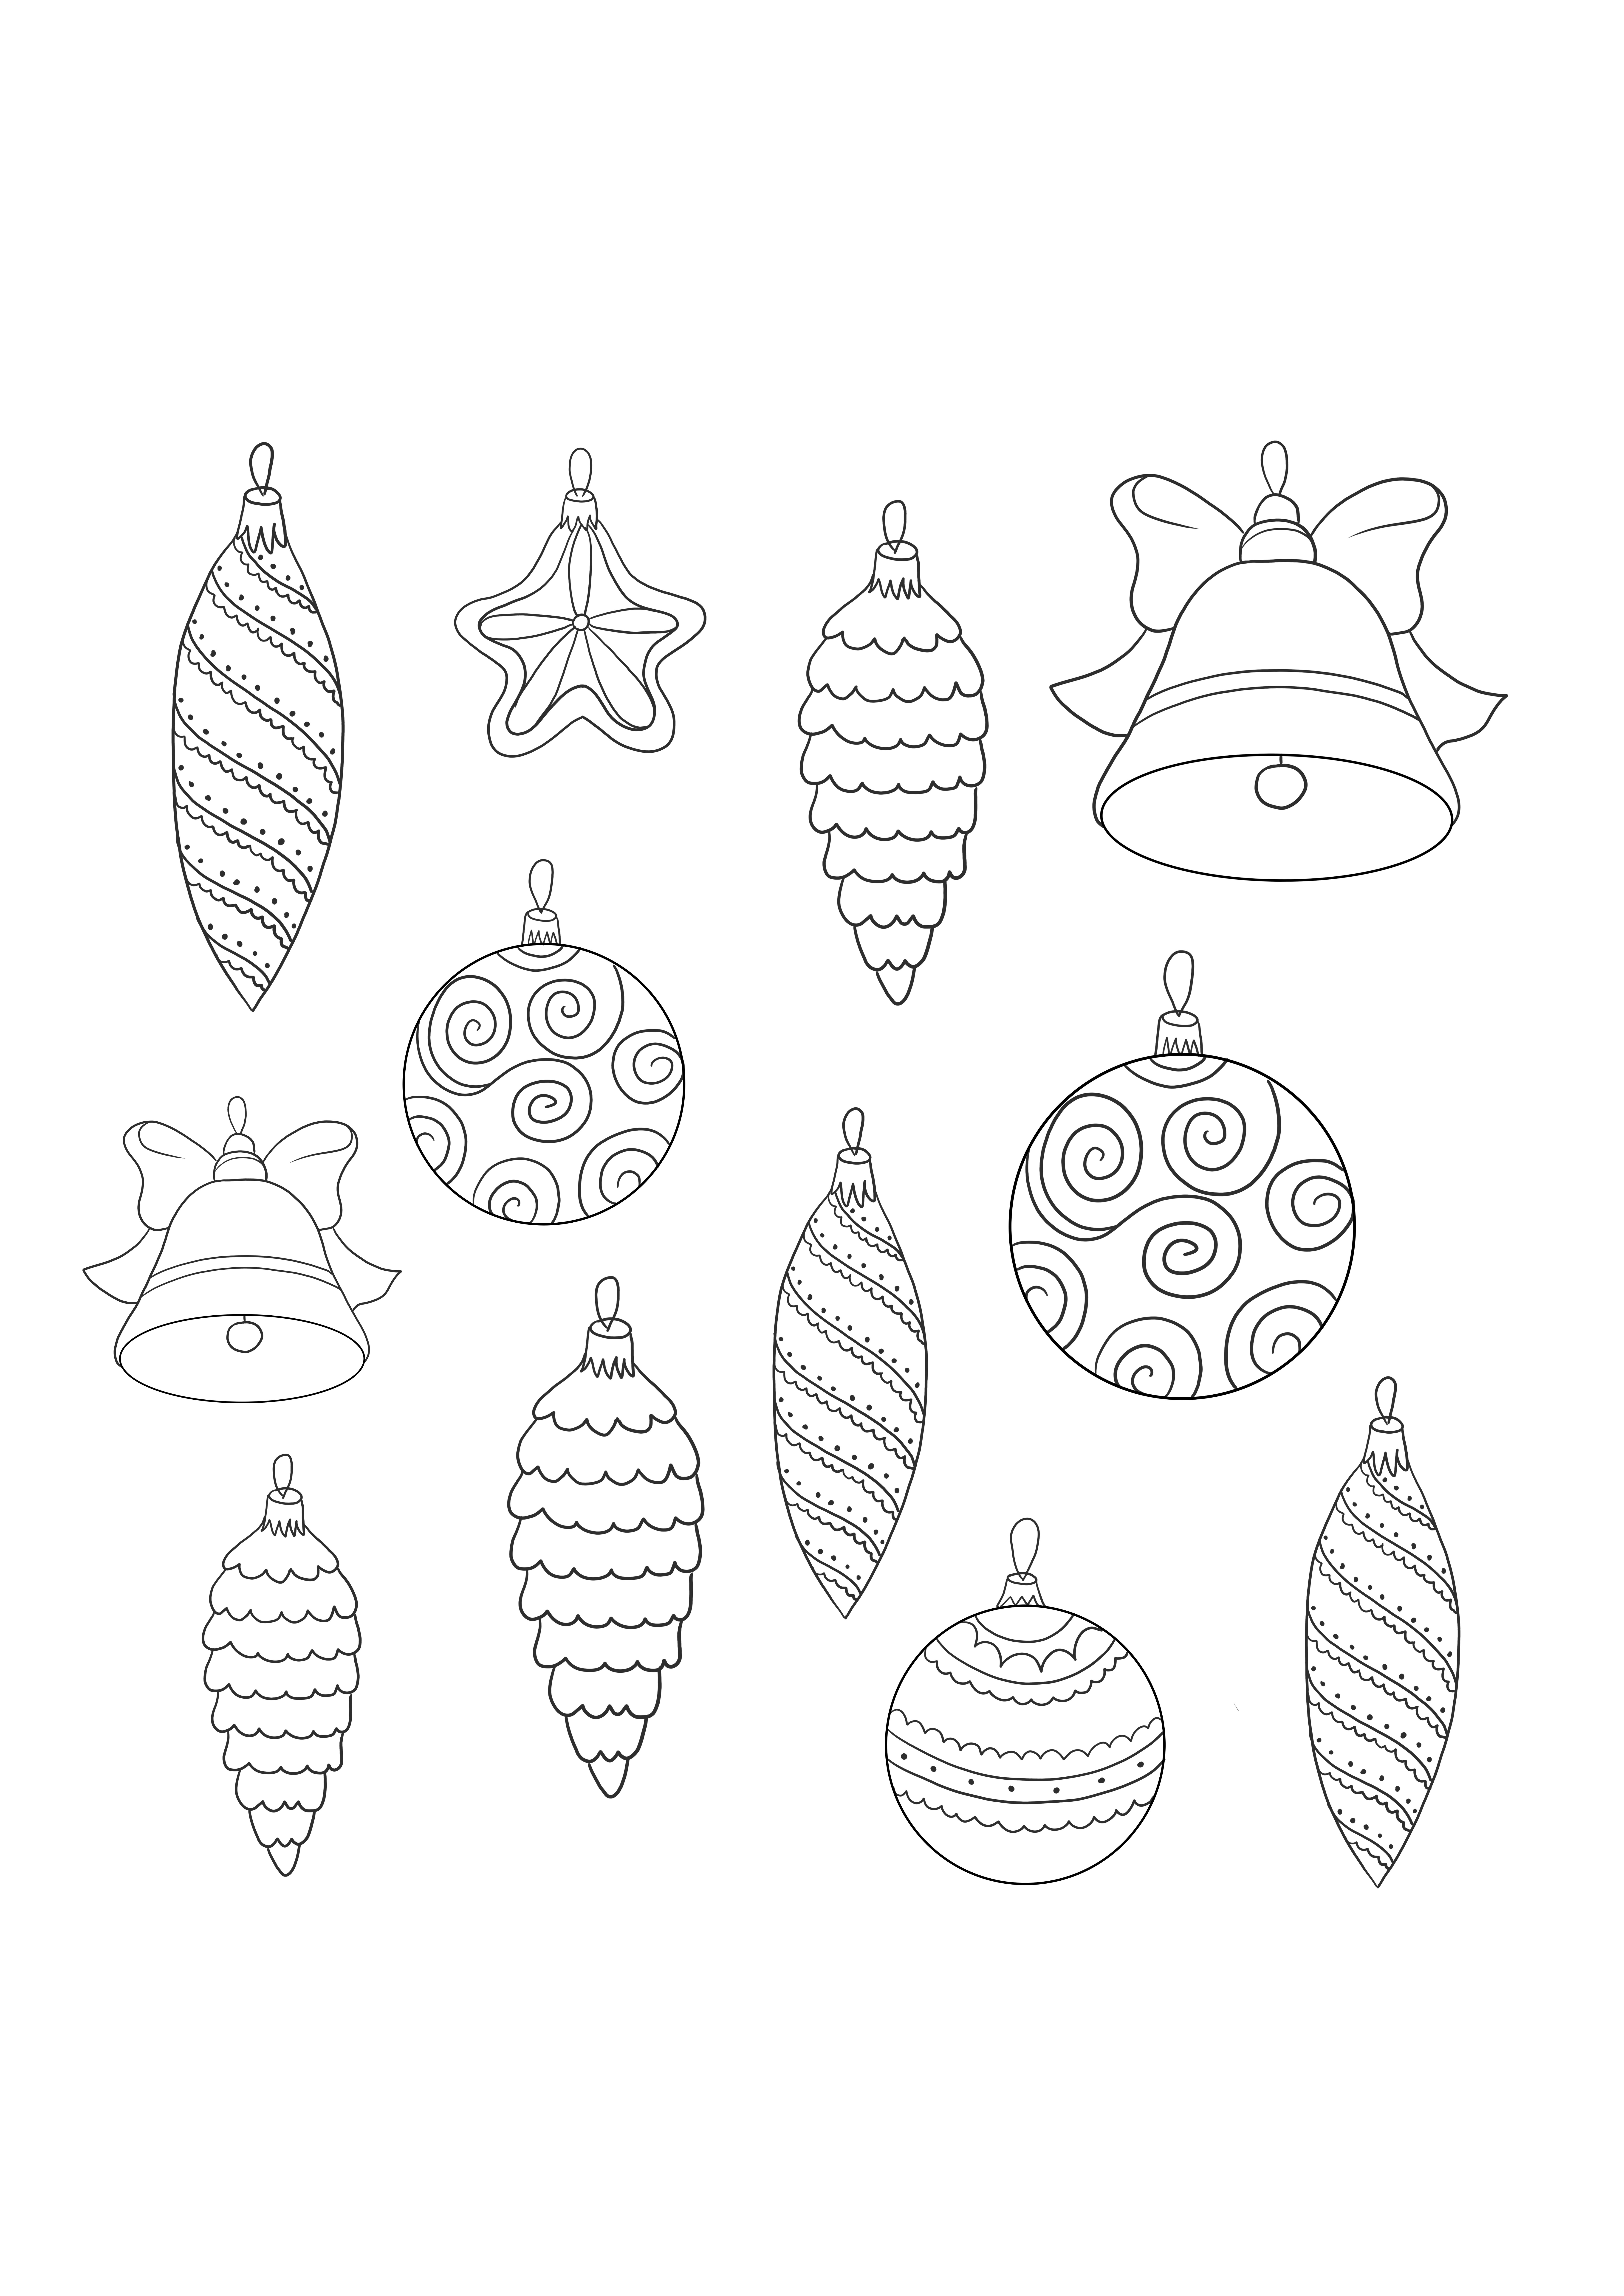 Christmas ornaments-ready to be colored and printed for free